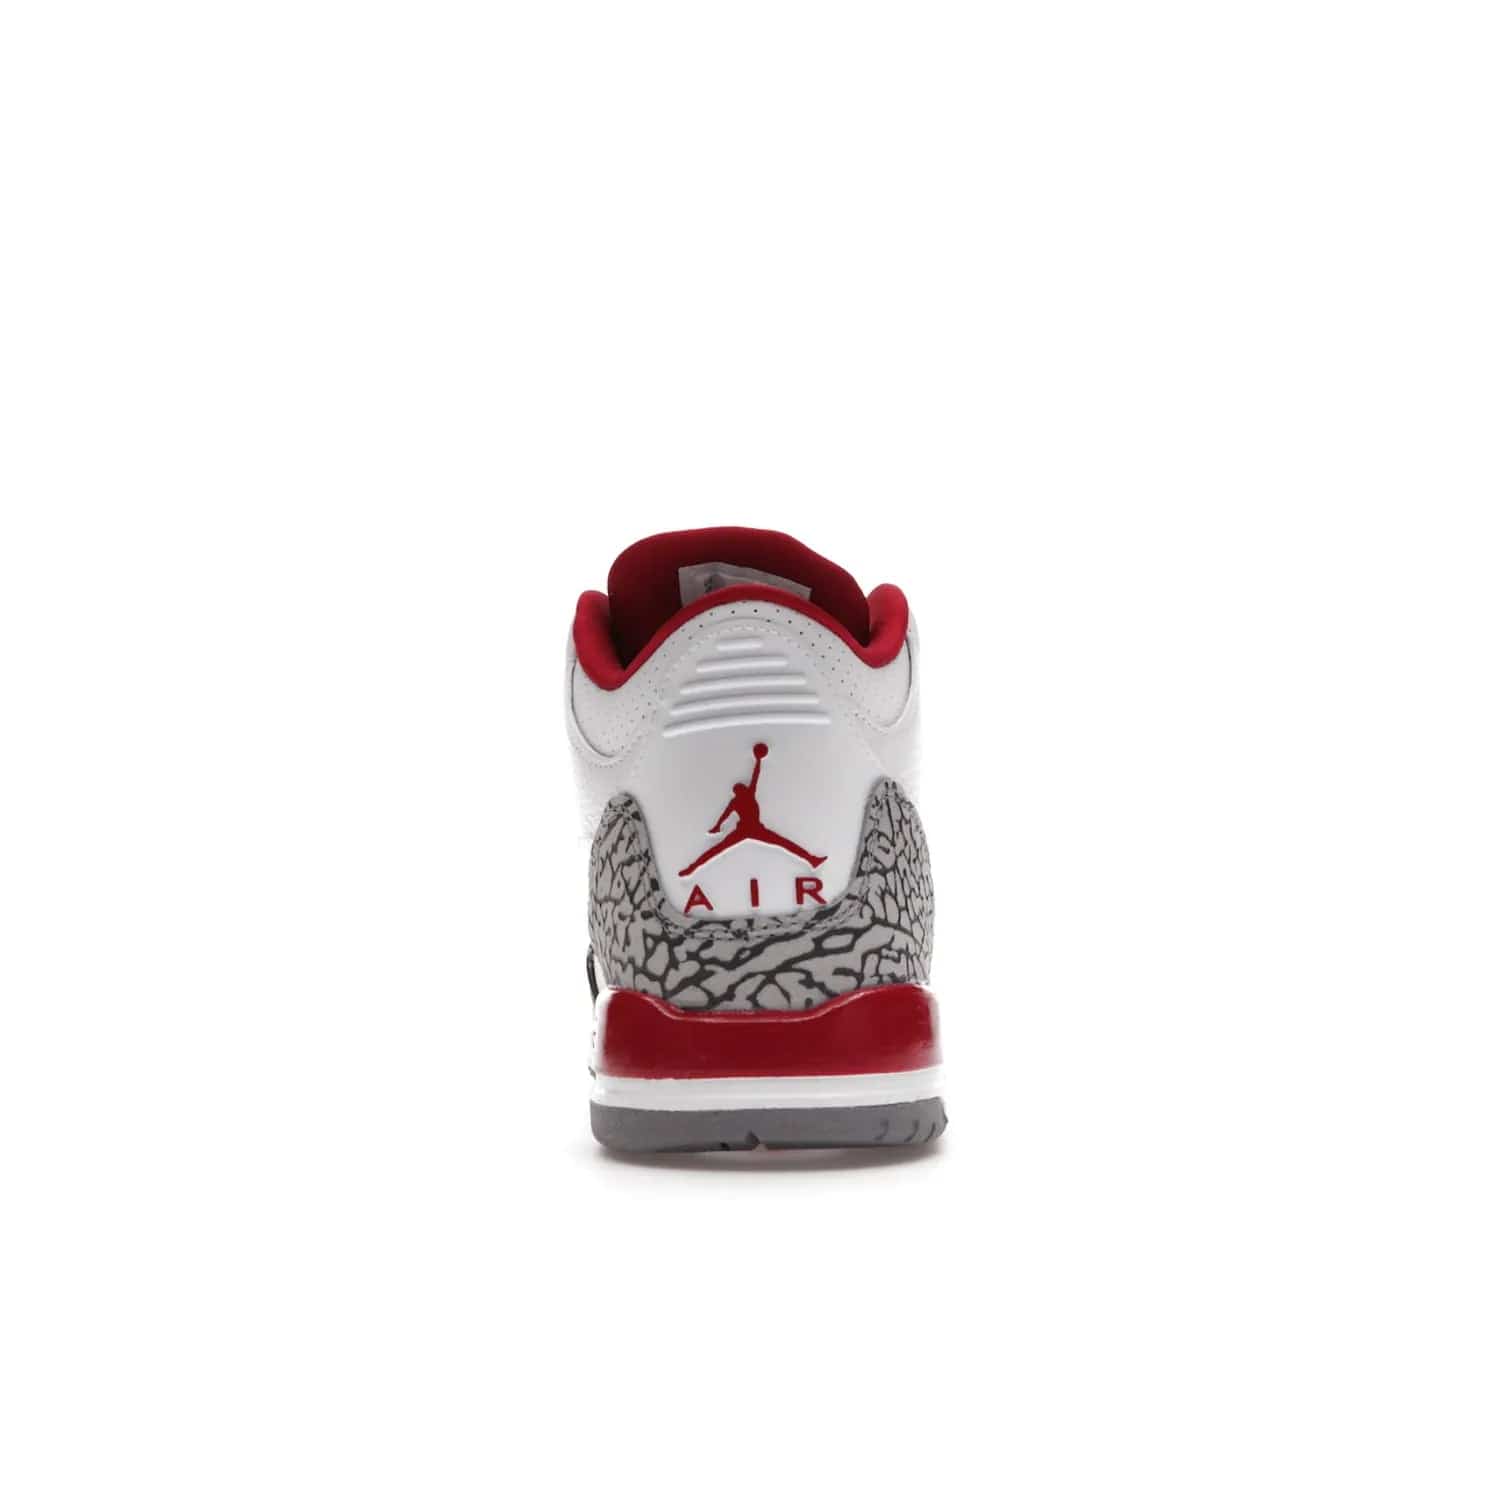 Jordan 3 Retro Cardinal (GS) - Image 28 - Only at www.BallersClubKickz.com - Shop the kid-sized Air Jordan 3 Retro Cardinal GS, released Feb 2022. White tumbled leather upper, light curry accenting, cement grey and classic red details throughout. Visible Air cushioning, midsole, and an eye-catching outsole. Show off your style with this fashionable streetwear silhouette.